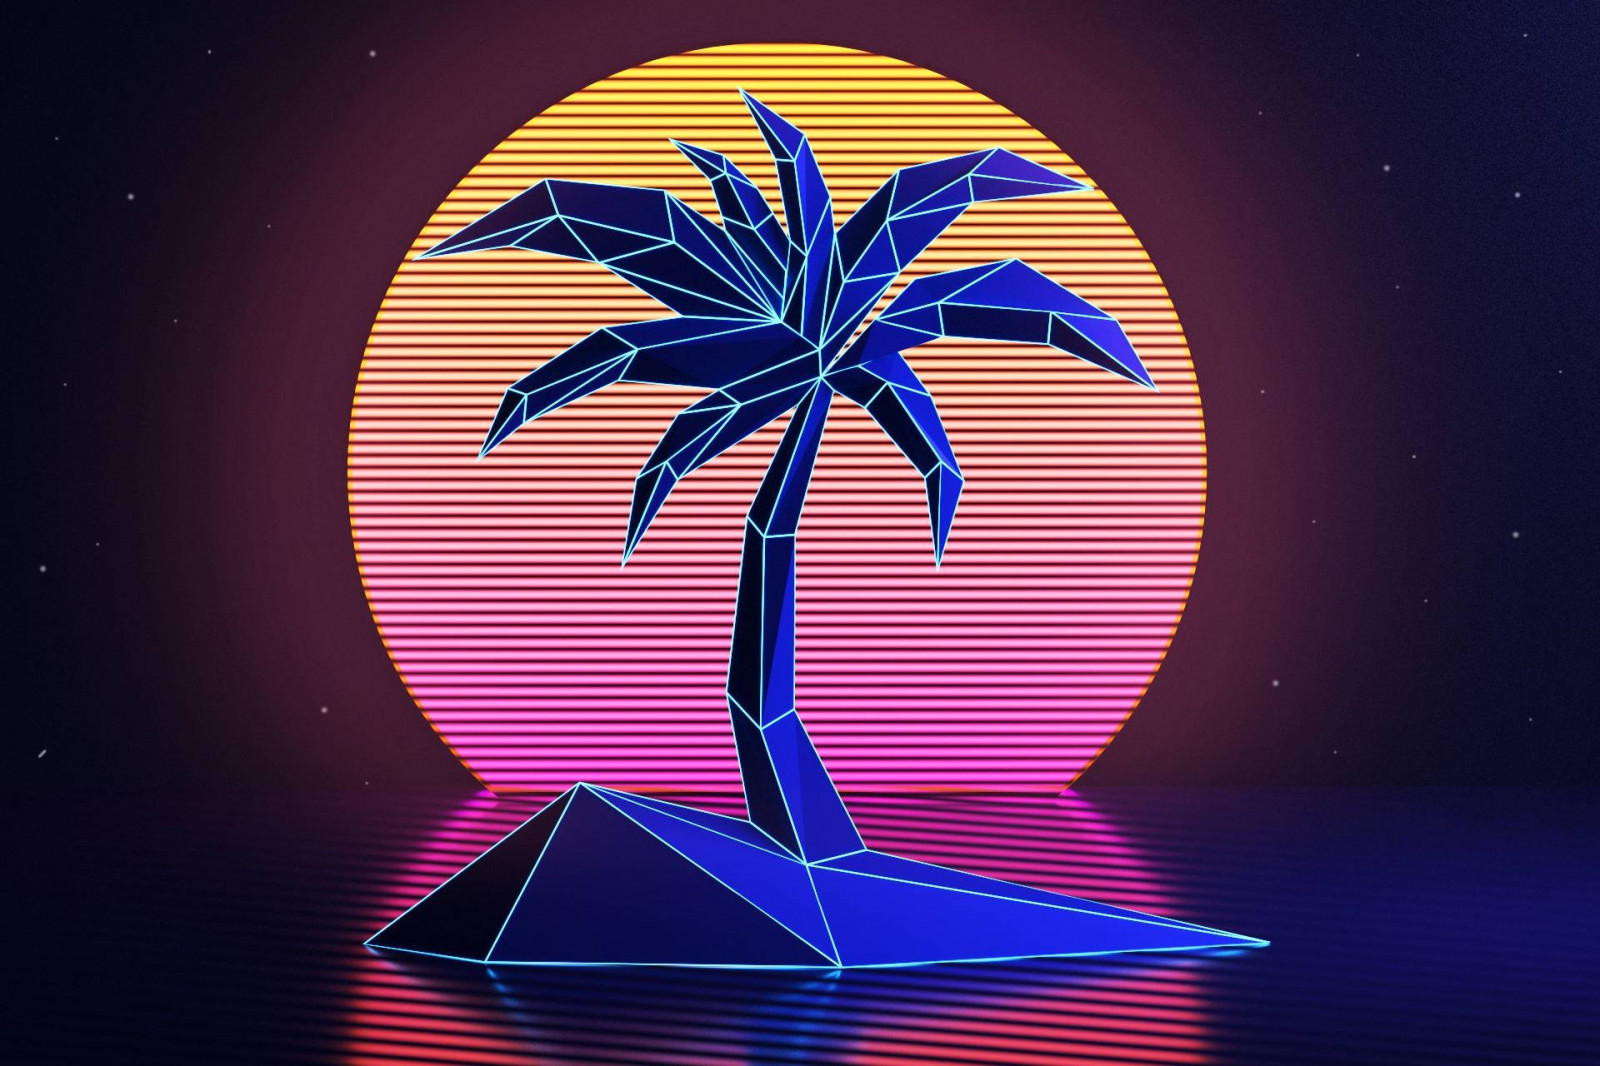 Wallpaper : illustration, sunset, low poly, Earth, blue, palm trees, ART, color, symbol, computer wallpaper, organ, astronomical object 1920x1280